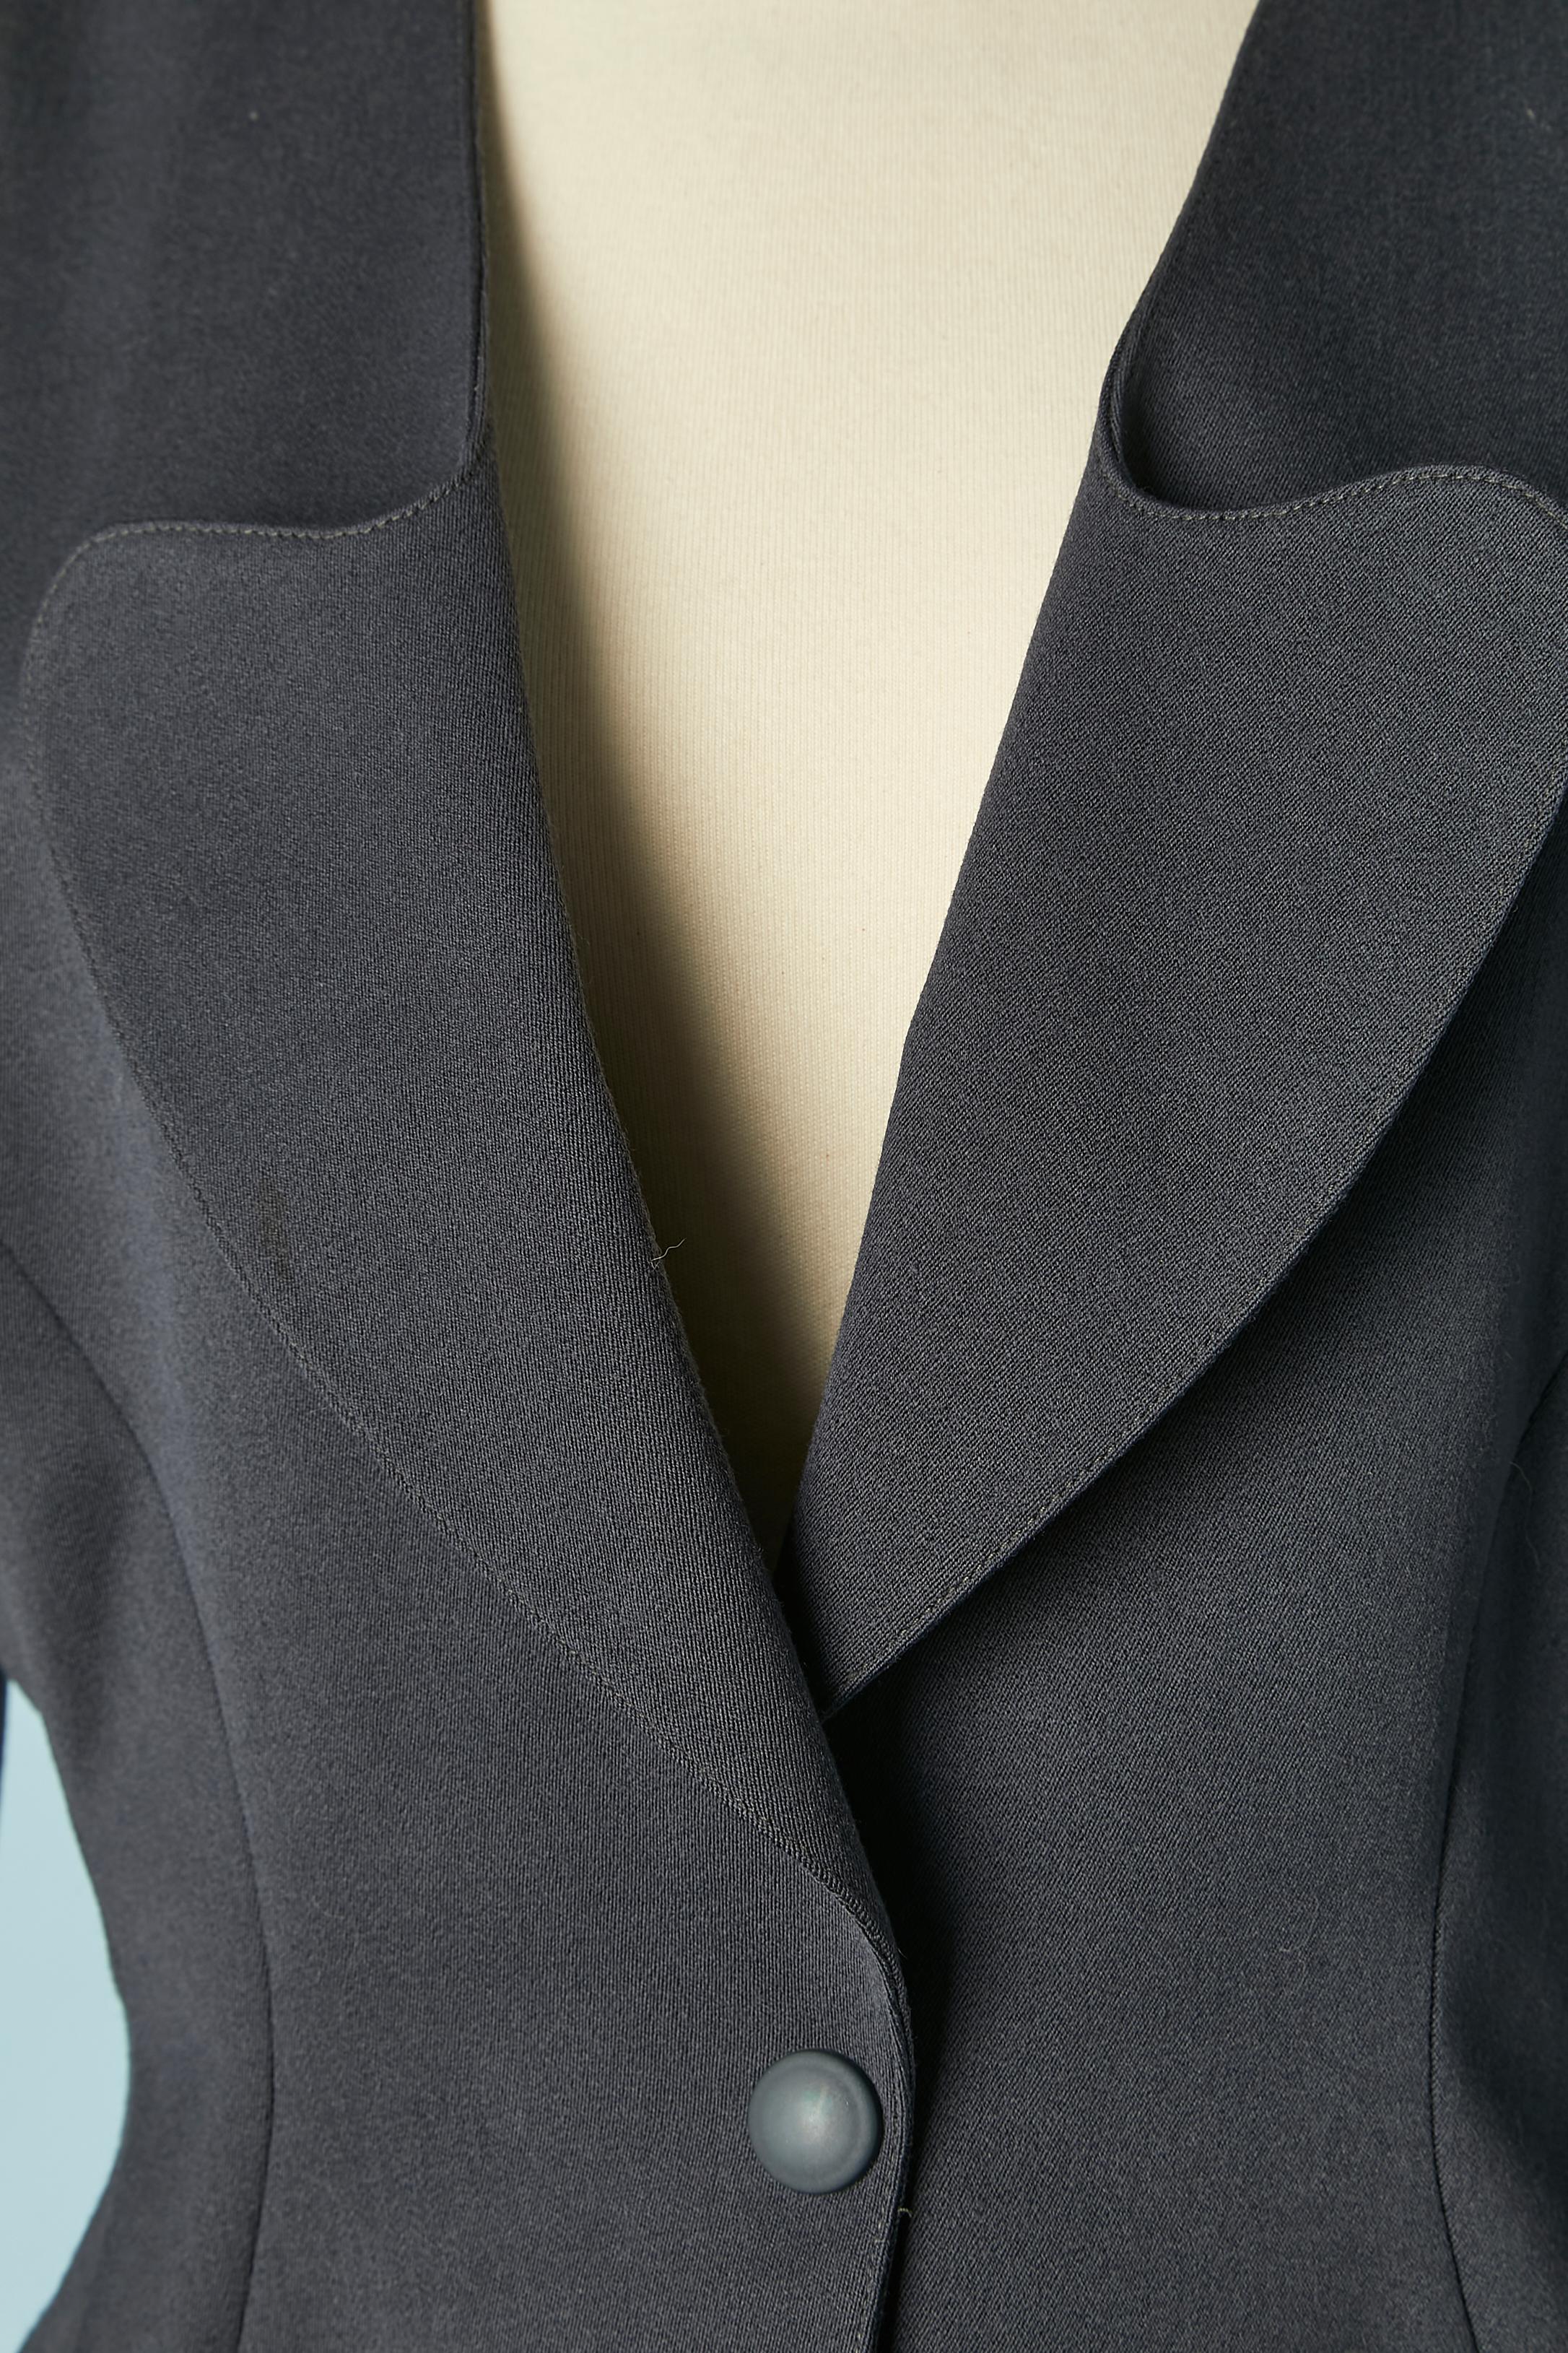 Anthracite grey wool skirt-suit. Lining: 60% acetate, 40% cupro. Shoulder-pad. Cut-work. One snap closure in the middle front. 
SIZE 40 (Fr) 10 (Us) for the jacket and 38 (Fr) 8 (US) M for the skirt 